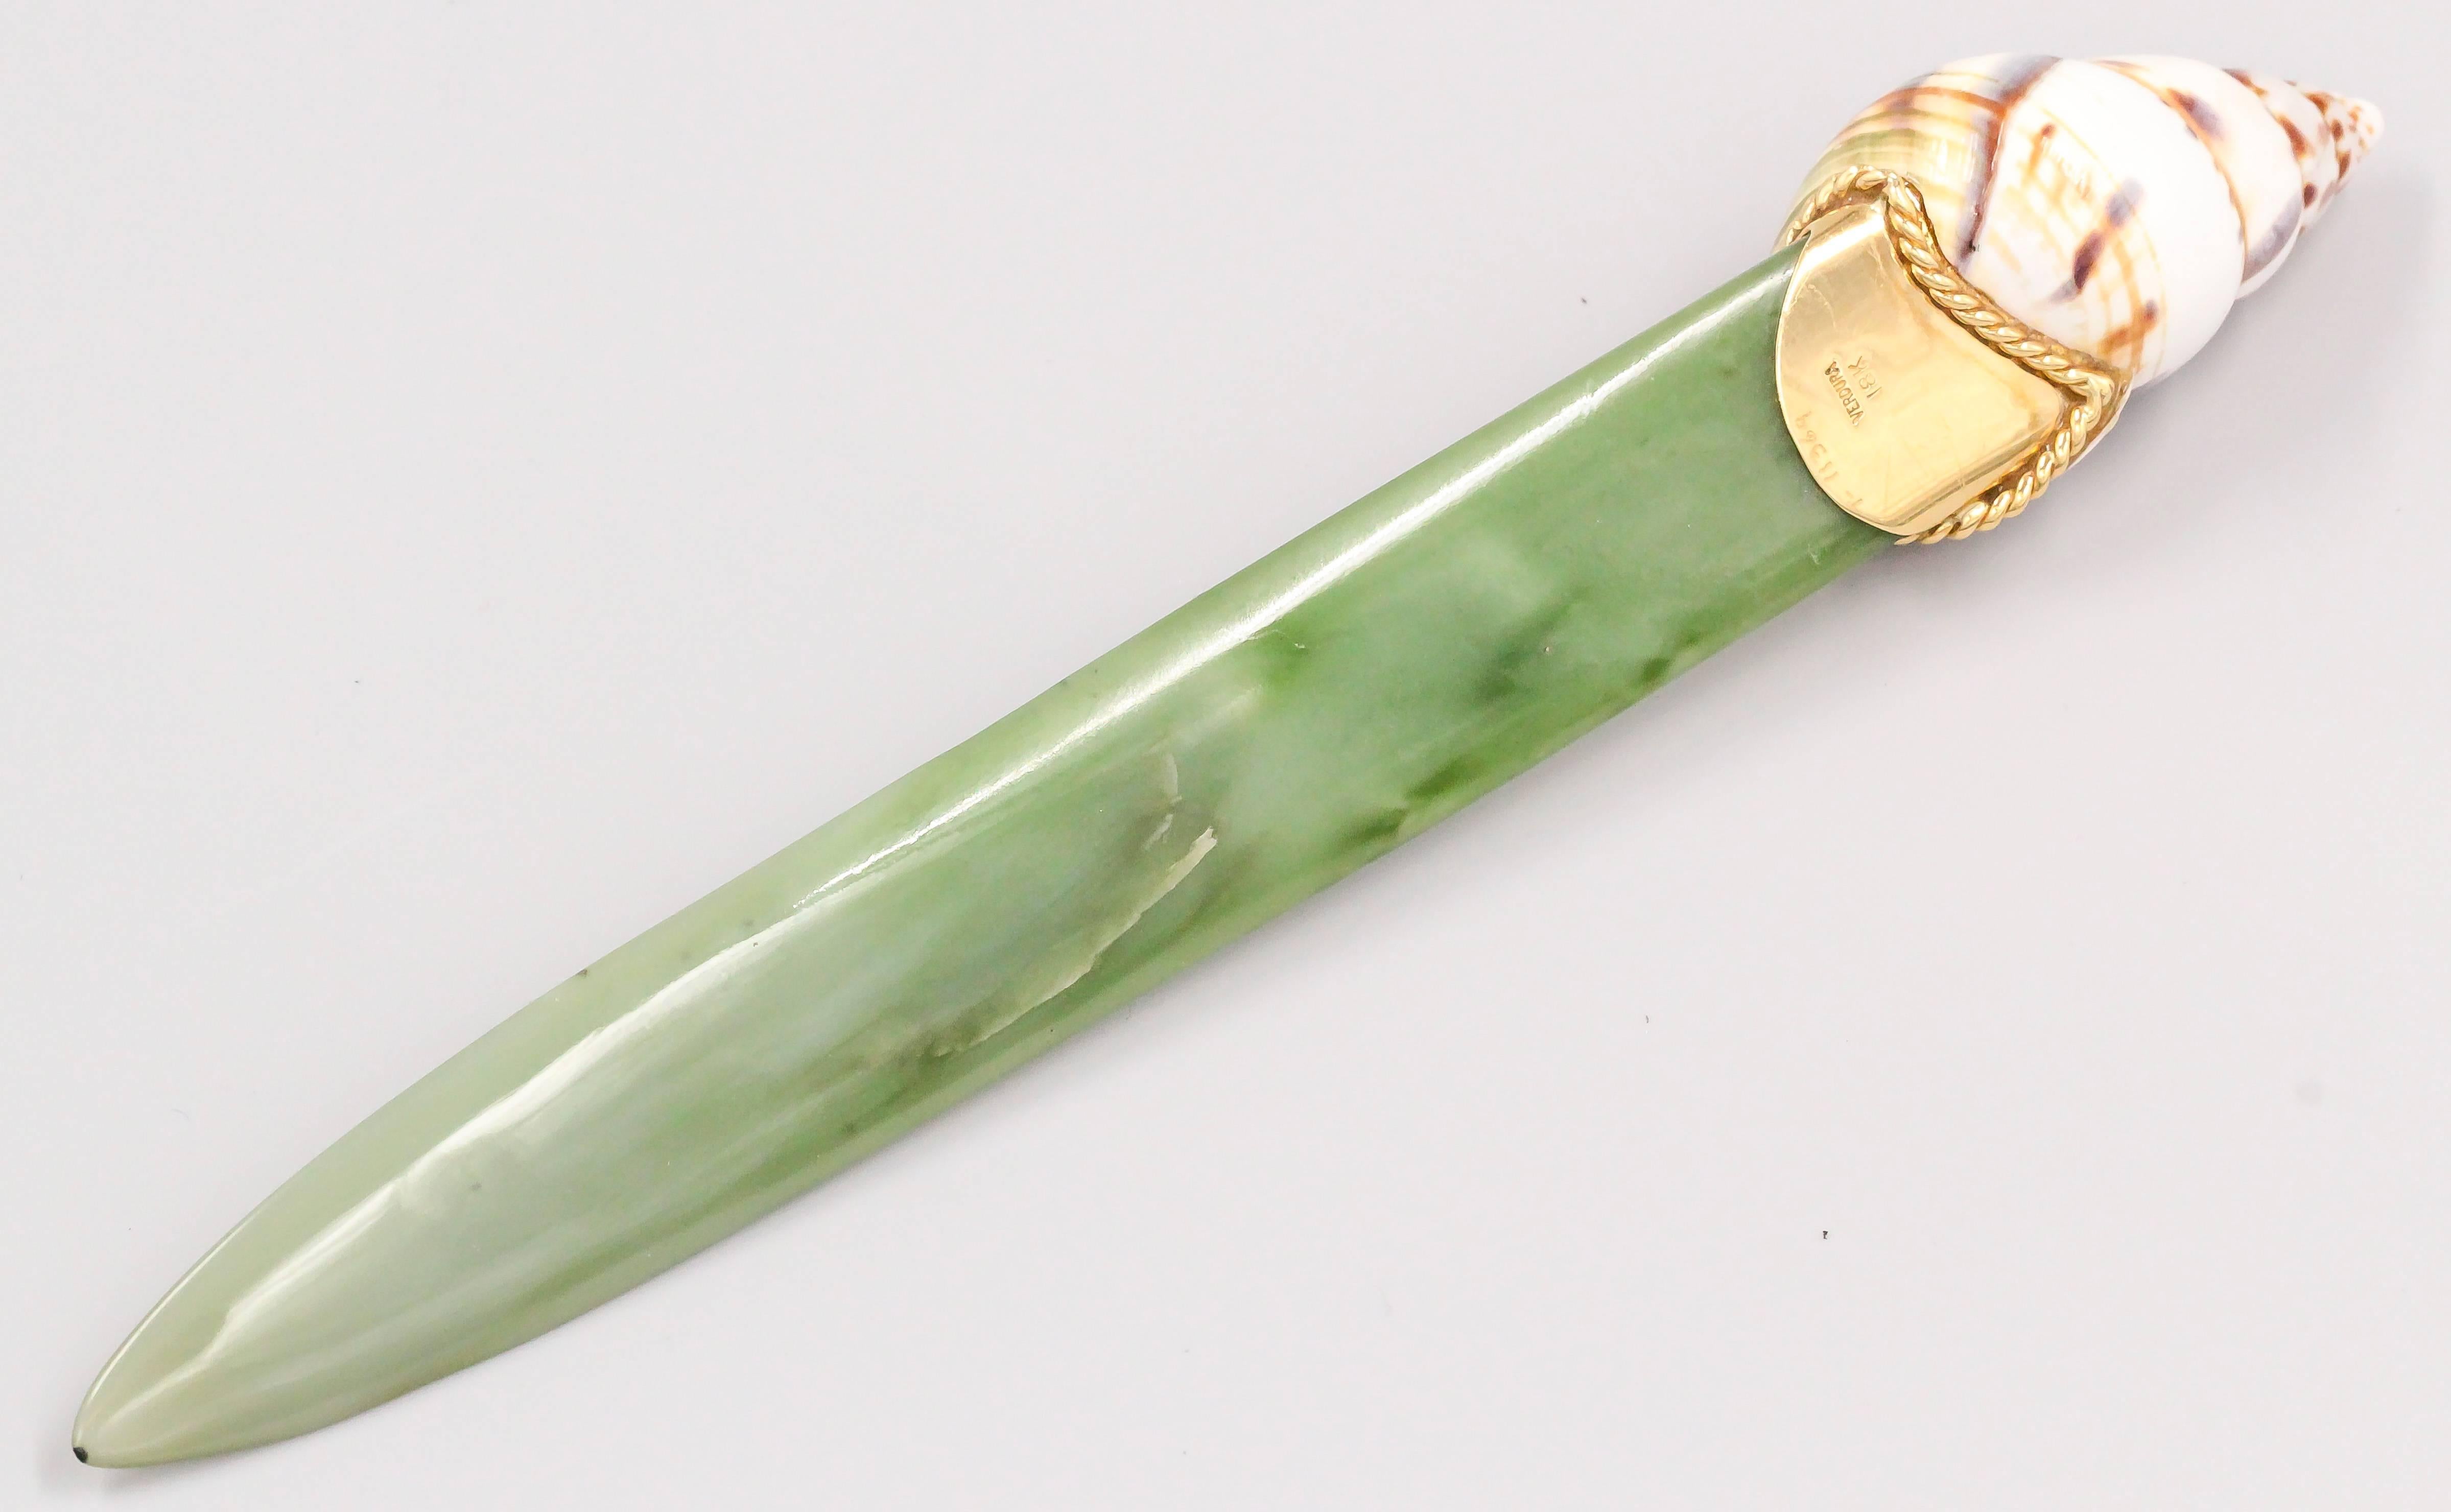 Rare and unusual shell and nephrite with 18K yellow gold letter opener by Verdura. It features a nephrite blade with a shell handle adorned with gold rope-like accents and base. Beautifully made and highly collectible.

Hallmarks: Verdura, 18k,